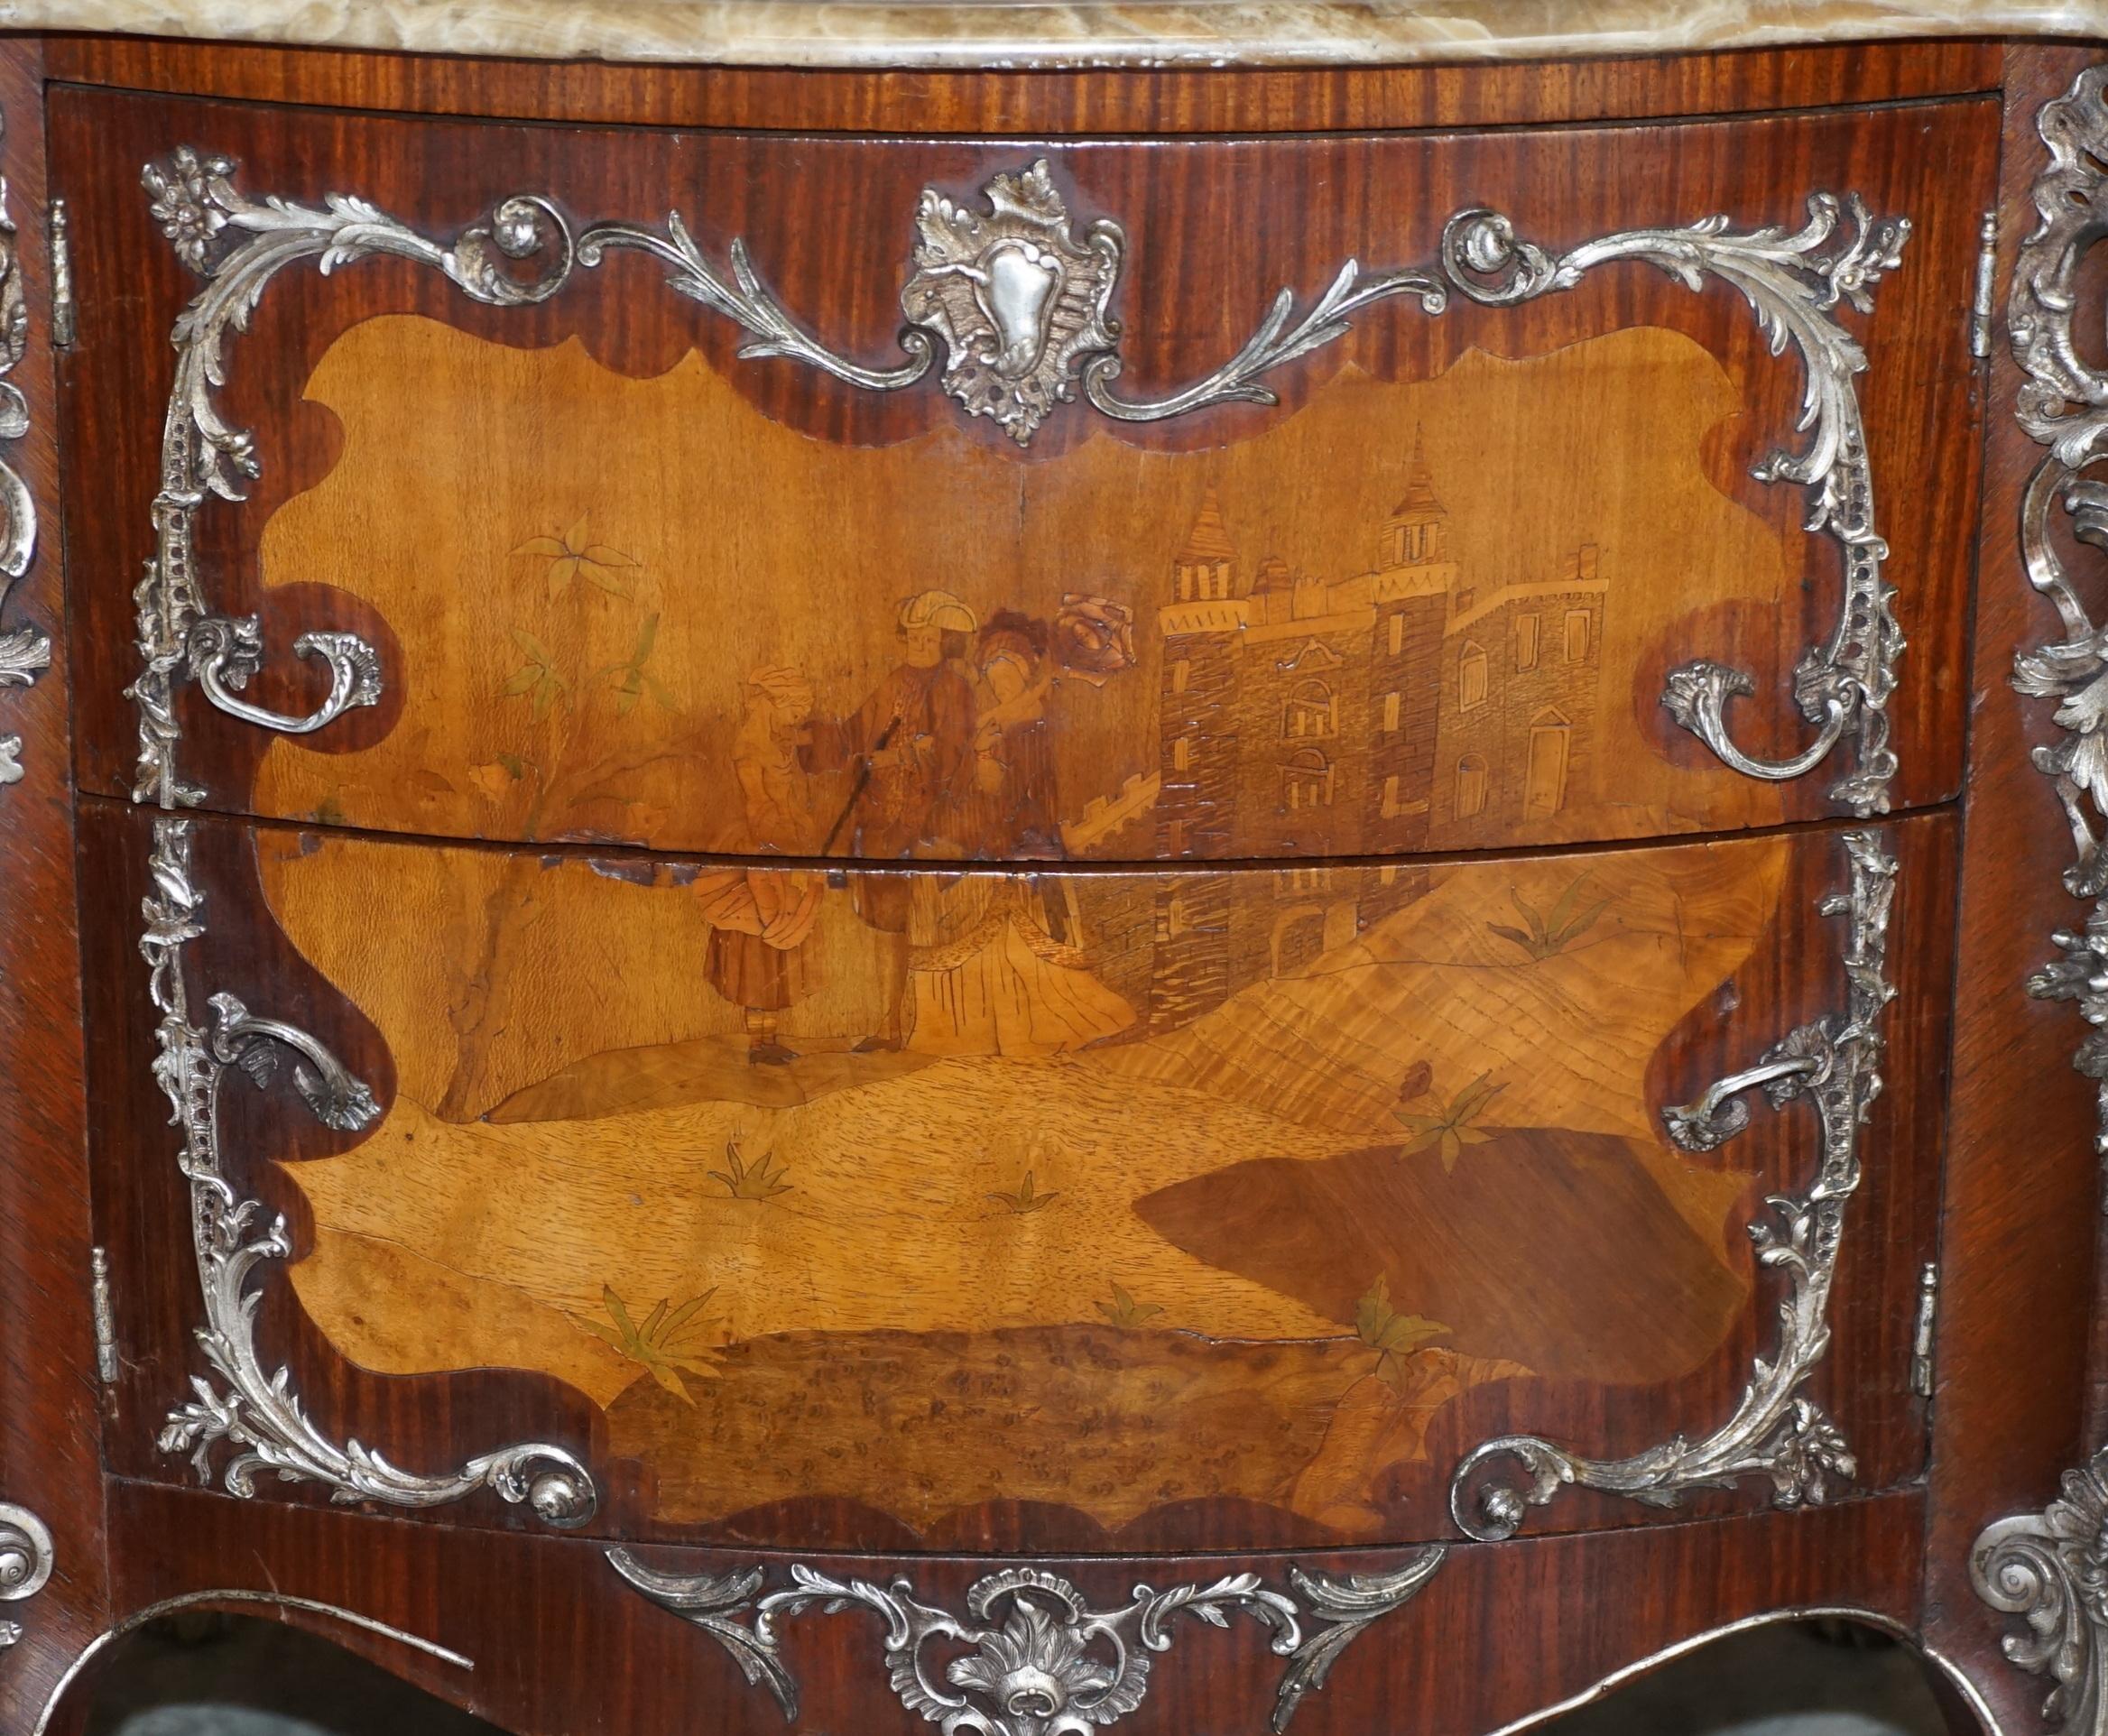 Rare & Collectable Germain Landrin circa 1750 French Marble Kingwood Sideboard For Sale 7